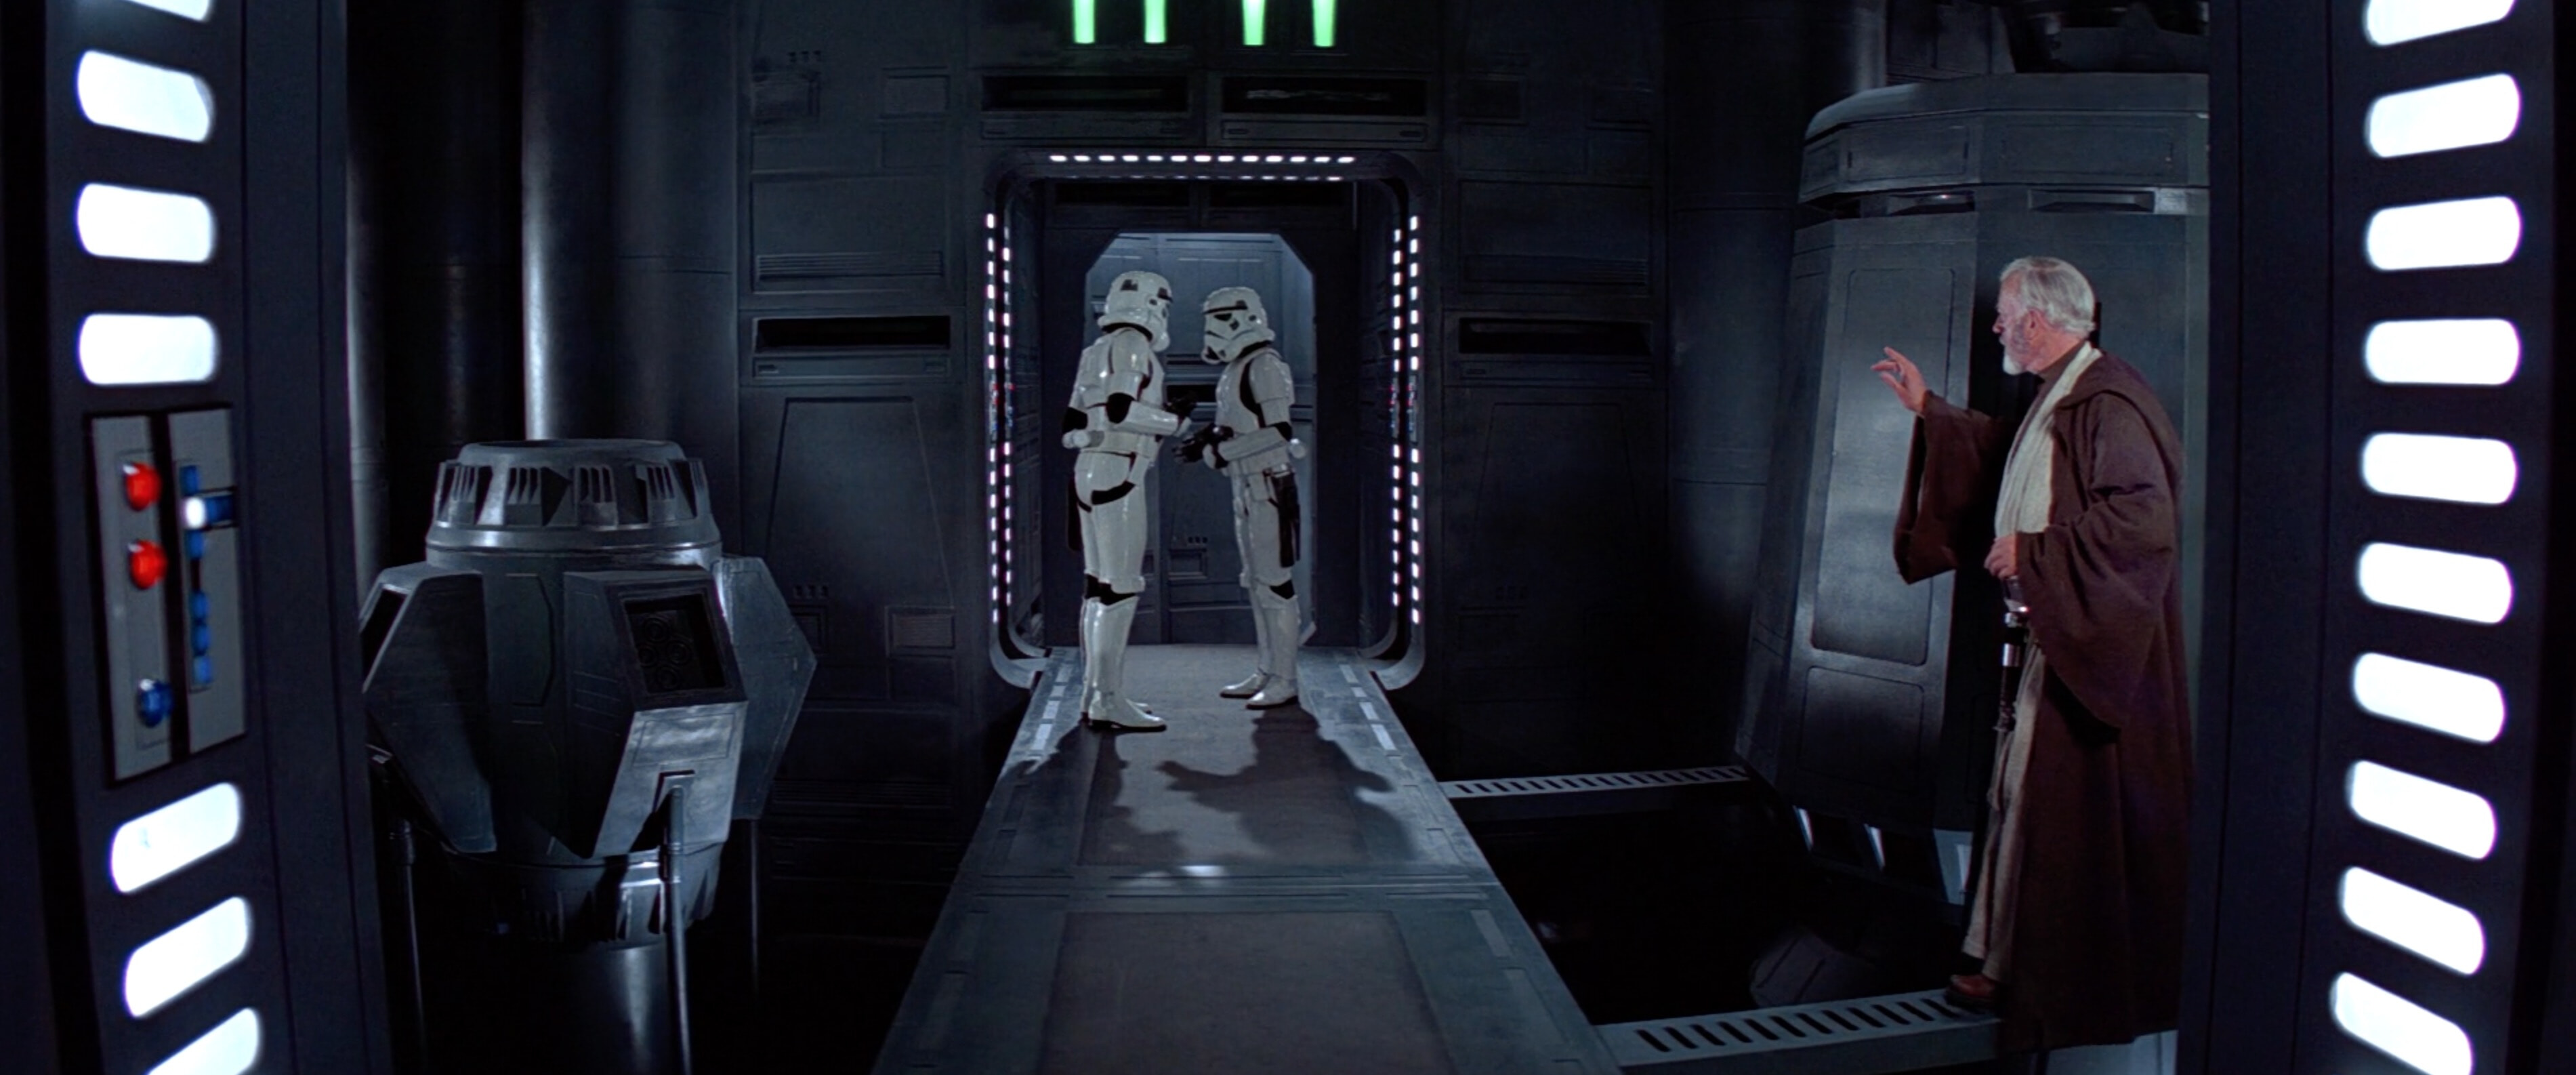 Obi-Wan Kenobi, using his hand to create an audio distraction to escape the attention of two stormtroopers near the Death Star’s tractor beam control panel.